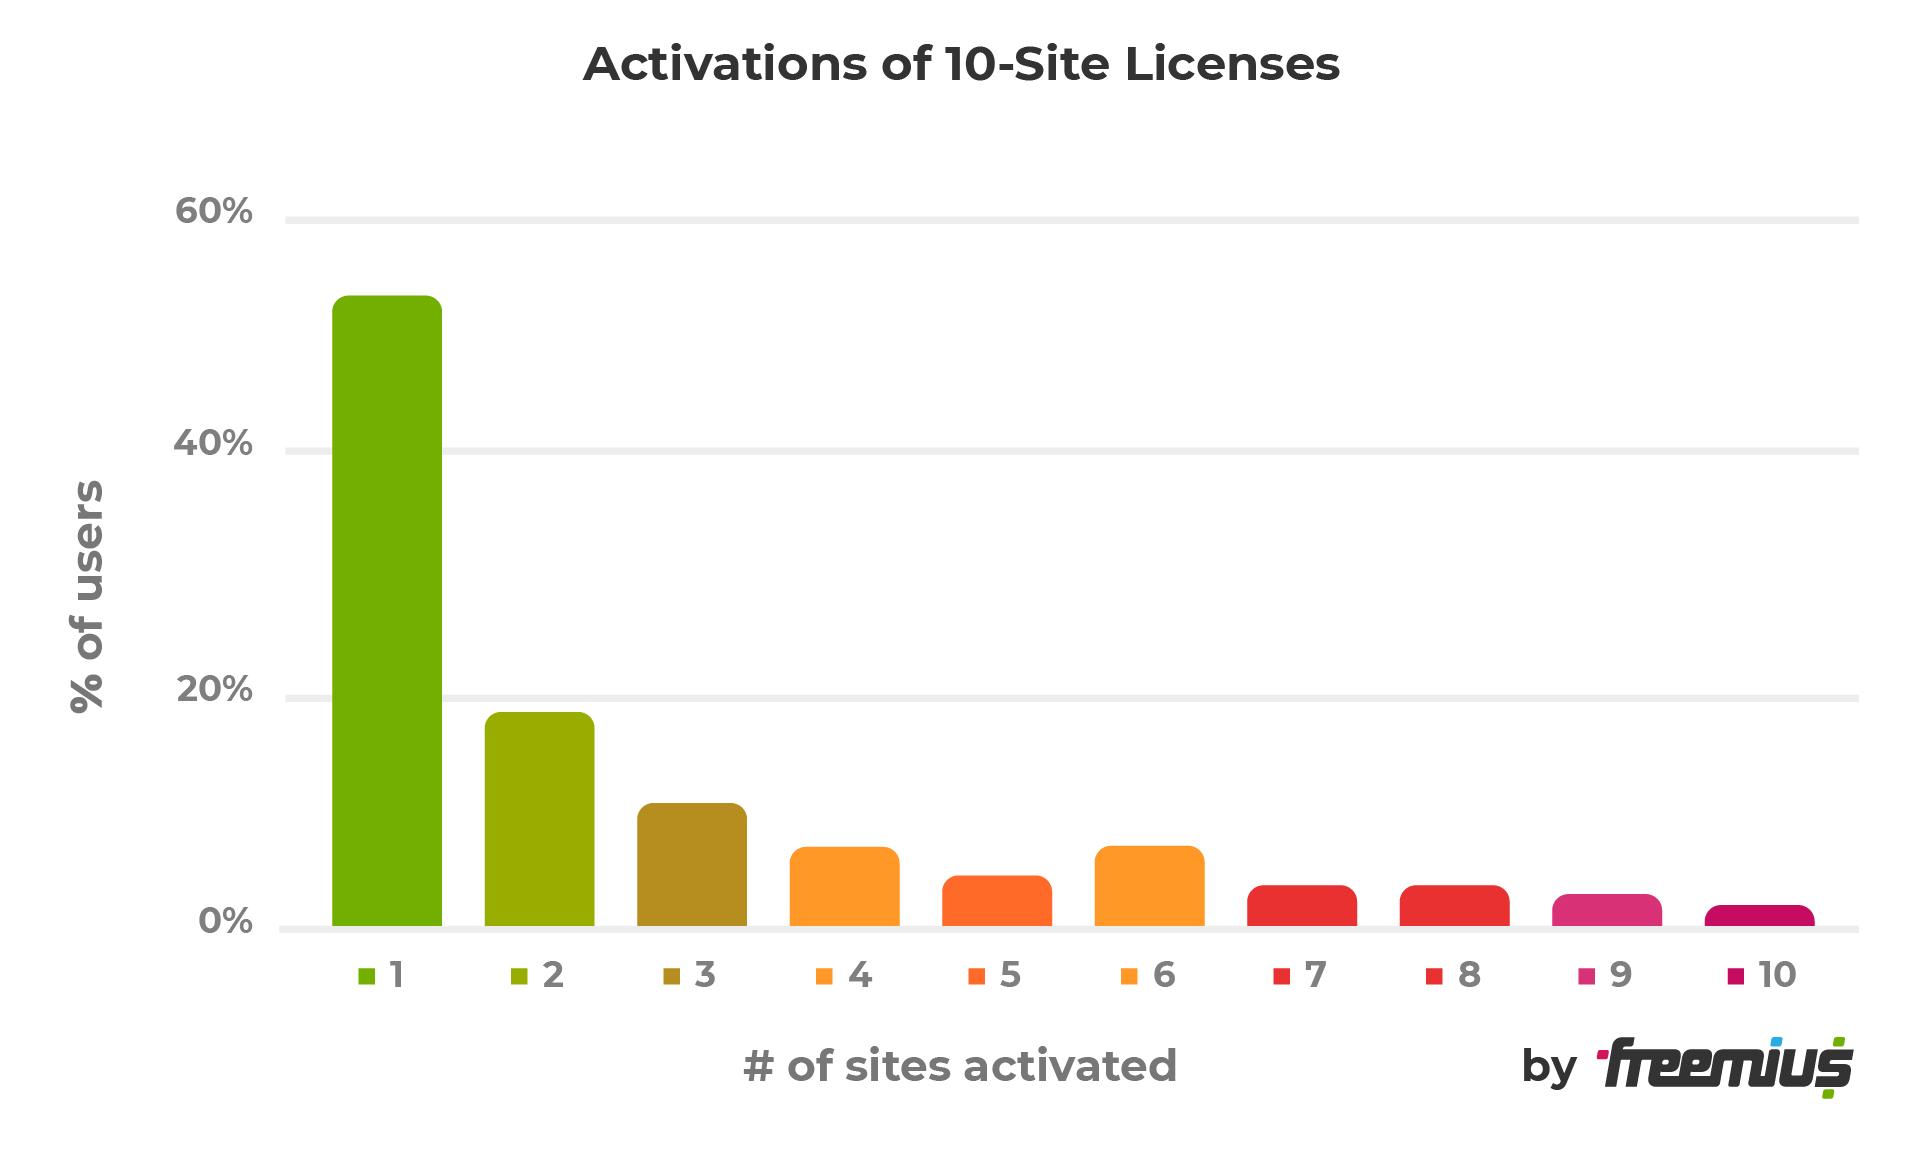 Activations of 10-site licenses